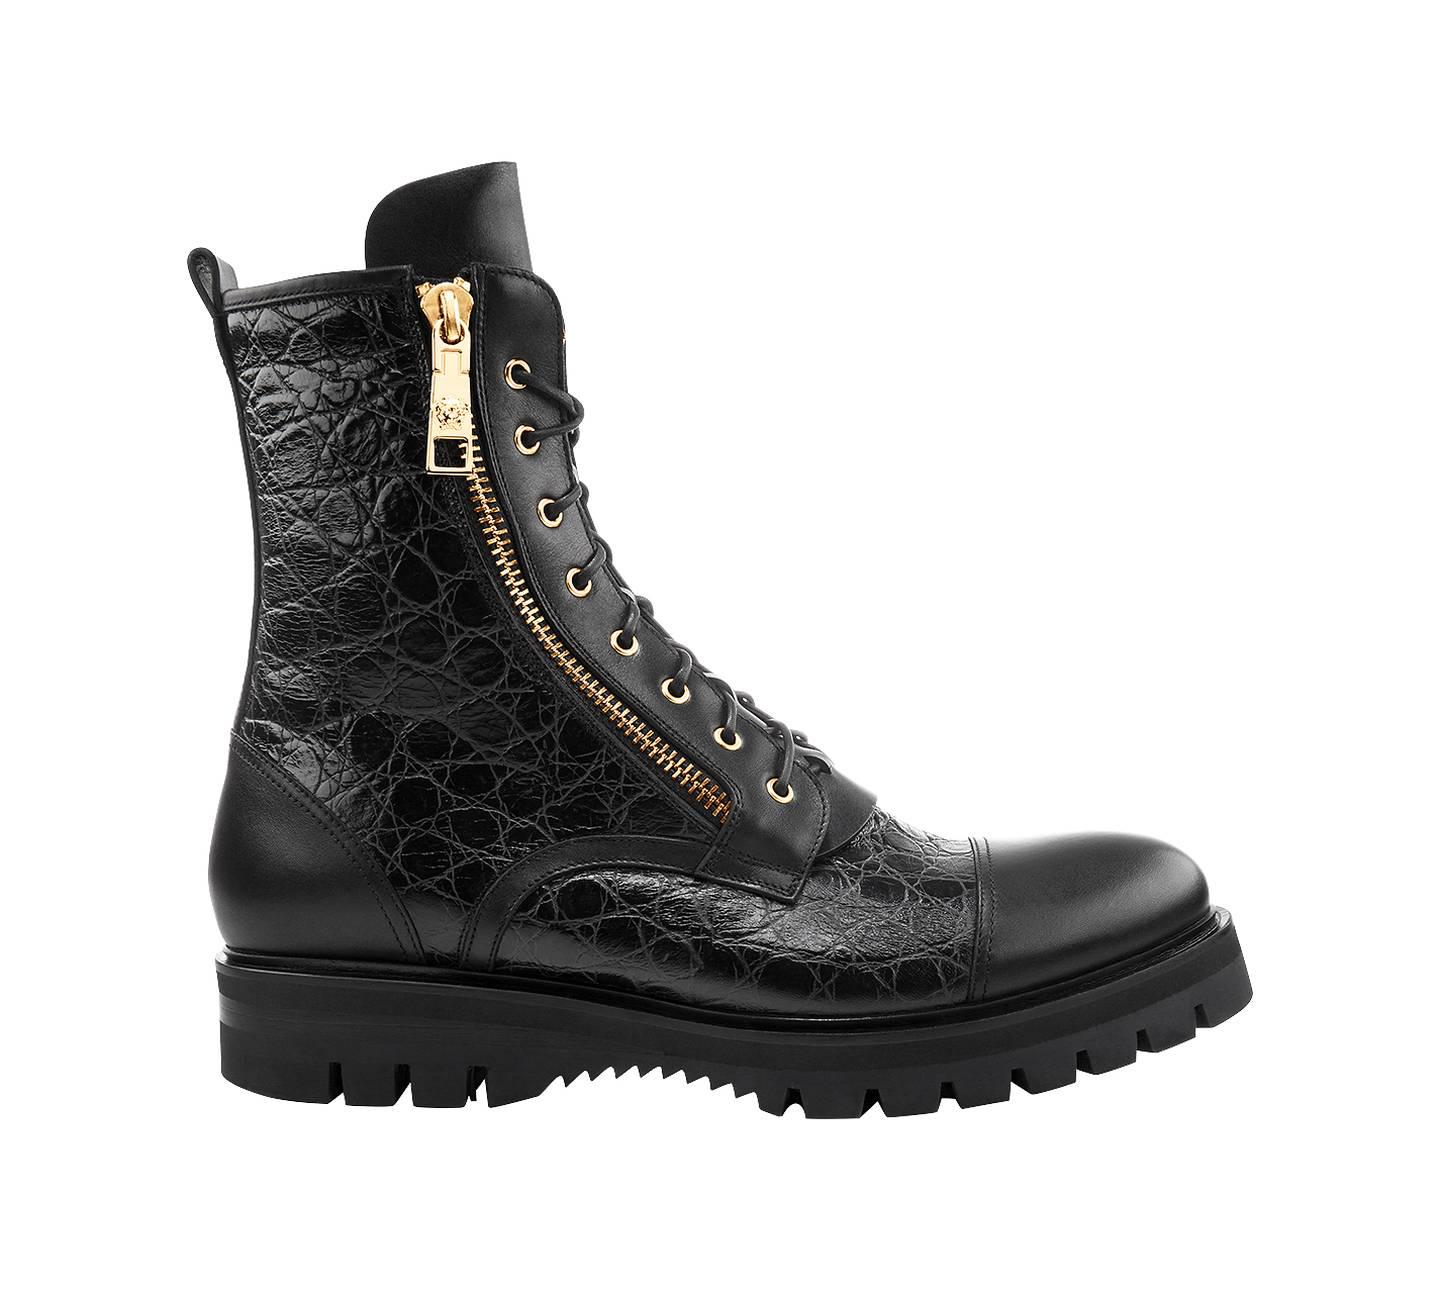 VERSACE

Fashioned in an army style, 
these stamped croc boots with gold-tone accents are a great choice for any edgy yet refined sartorial look. 


Men's Army Style Boot, Gold-Tone Medusas on front tongue, 

Gold-side zip with Medusa on gold-tone